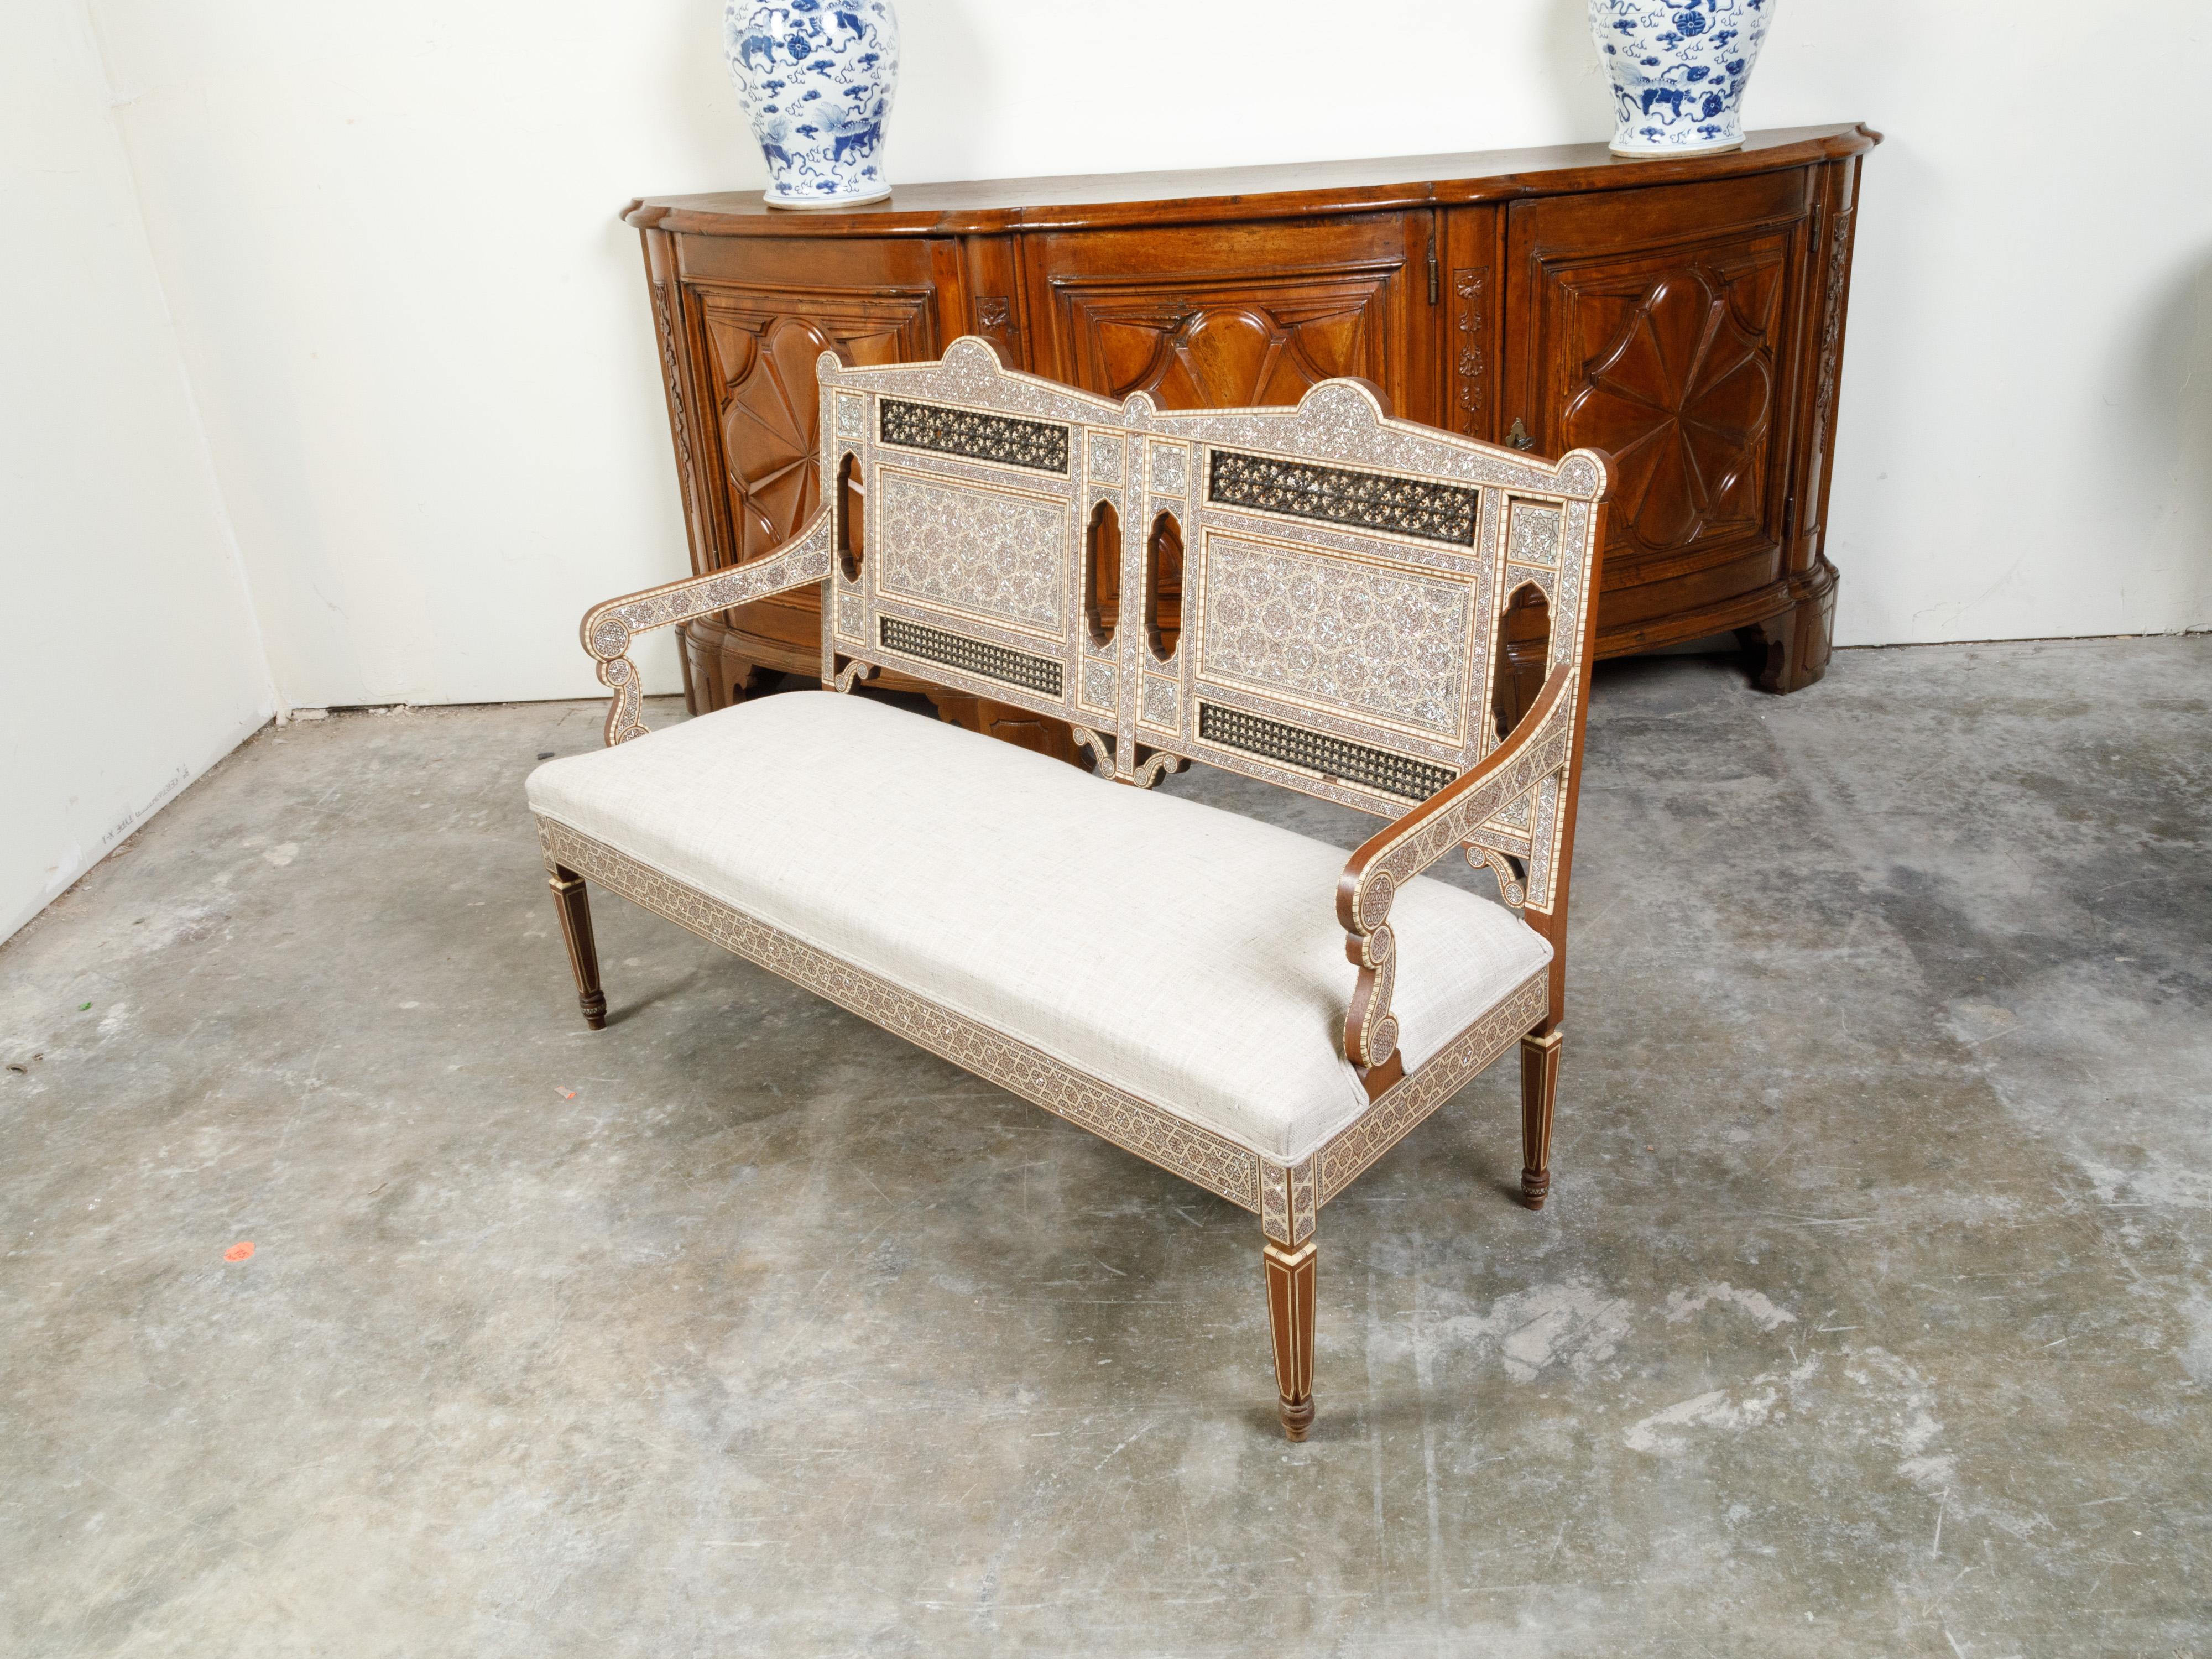 Moroccan Midcentury Settee with Mother-of-Pearl Inlay and New Upholstery 4